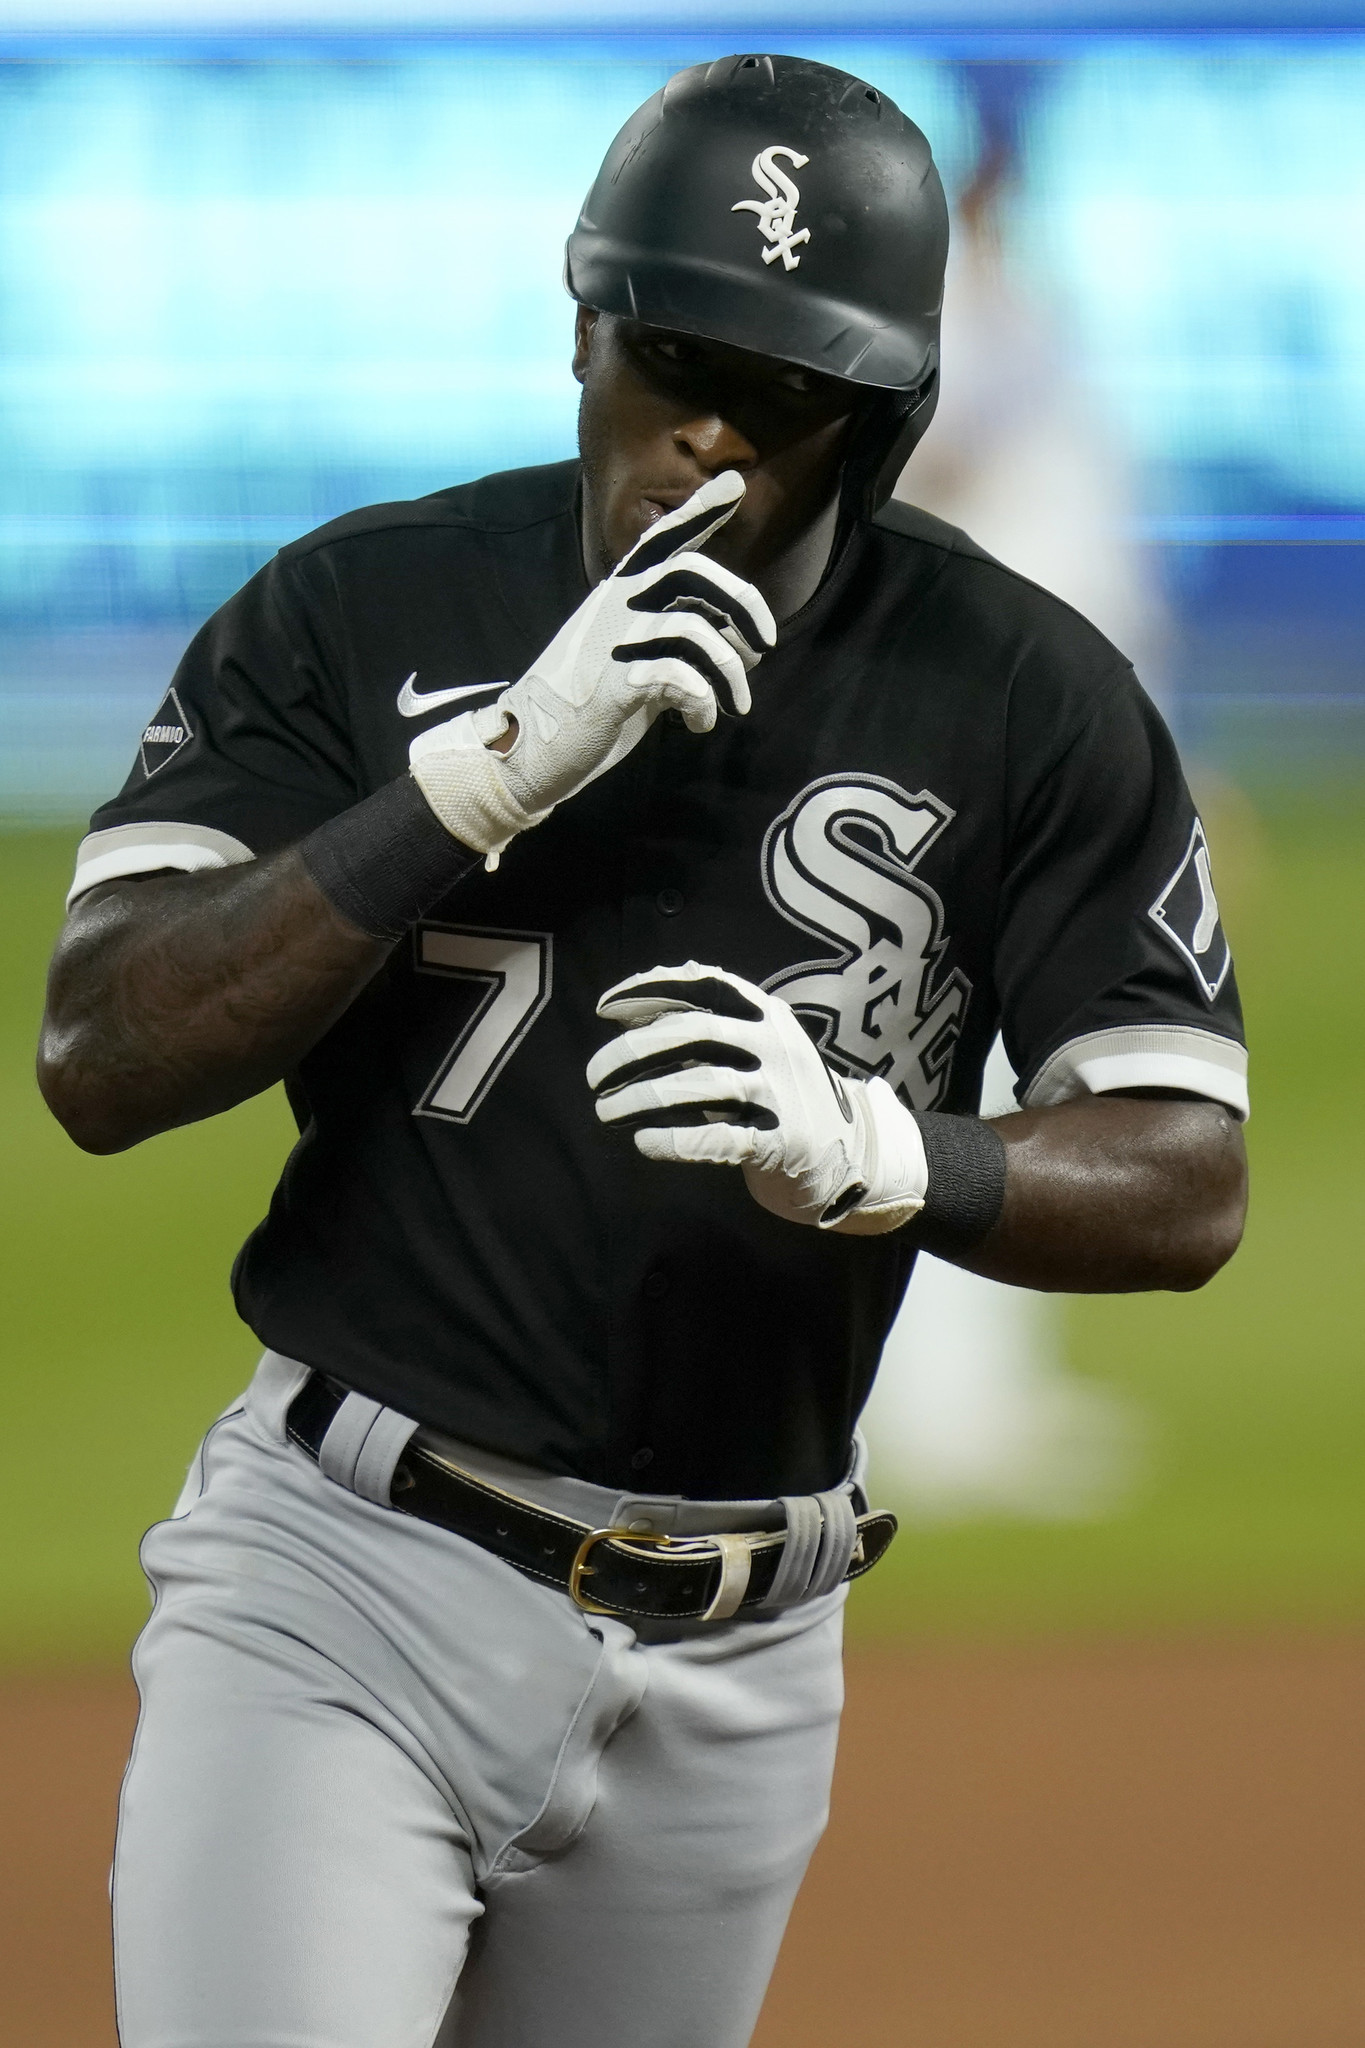 Chicago White Sox hit 3 homers in 11-6 win over Royals